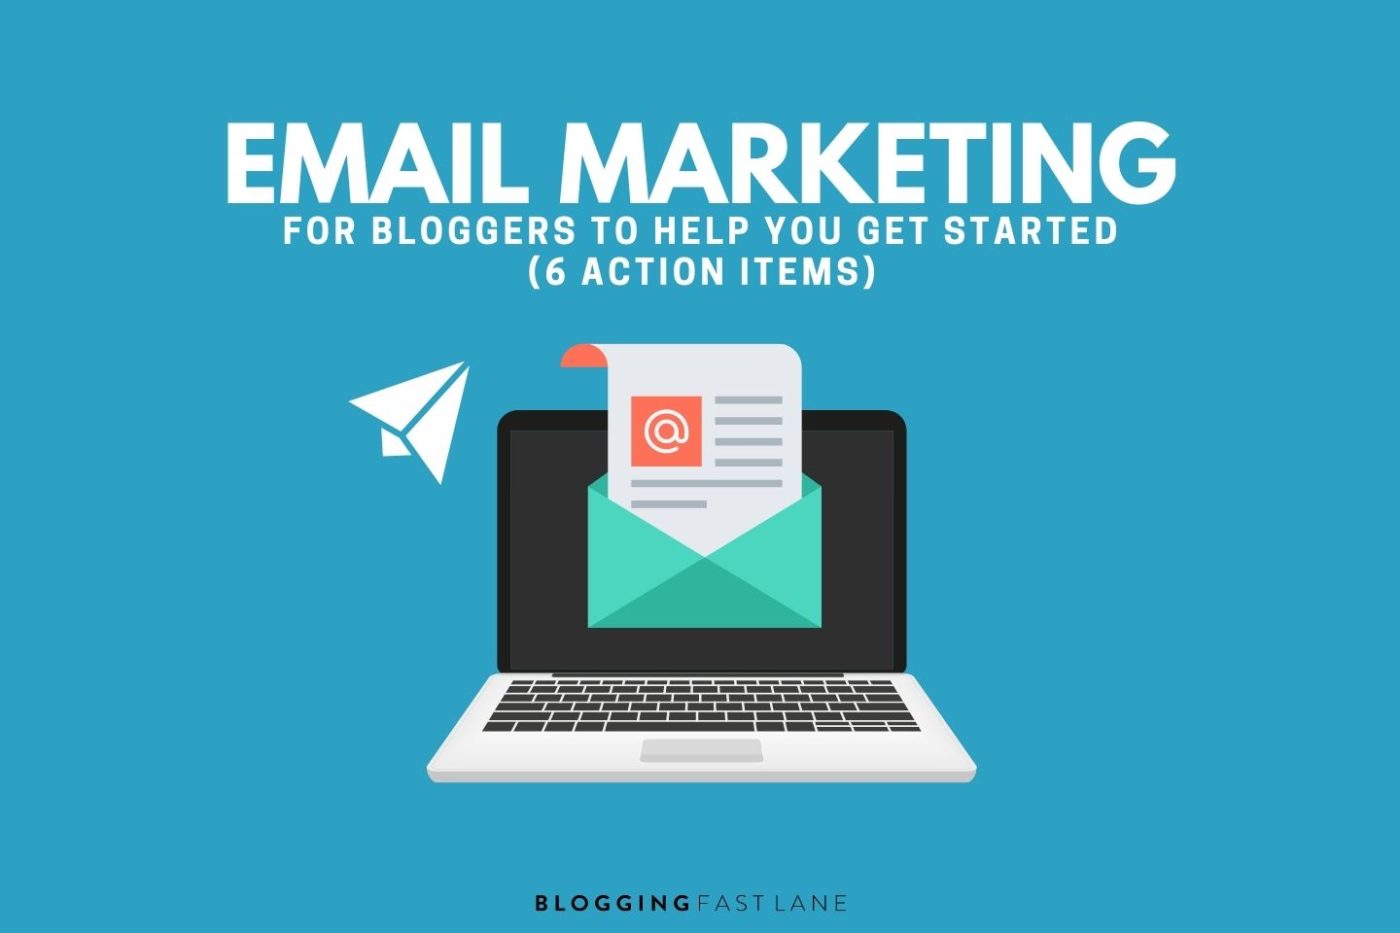 Email marketing for bloggers